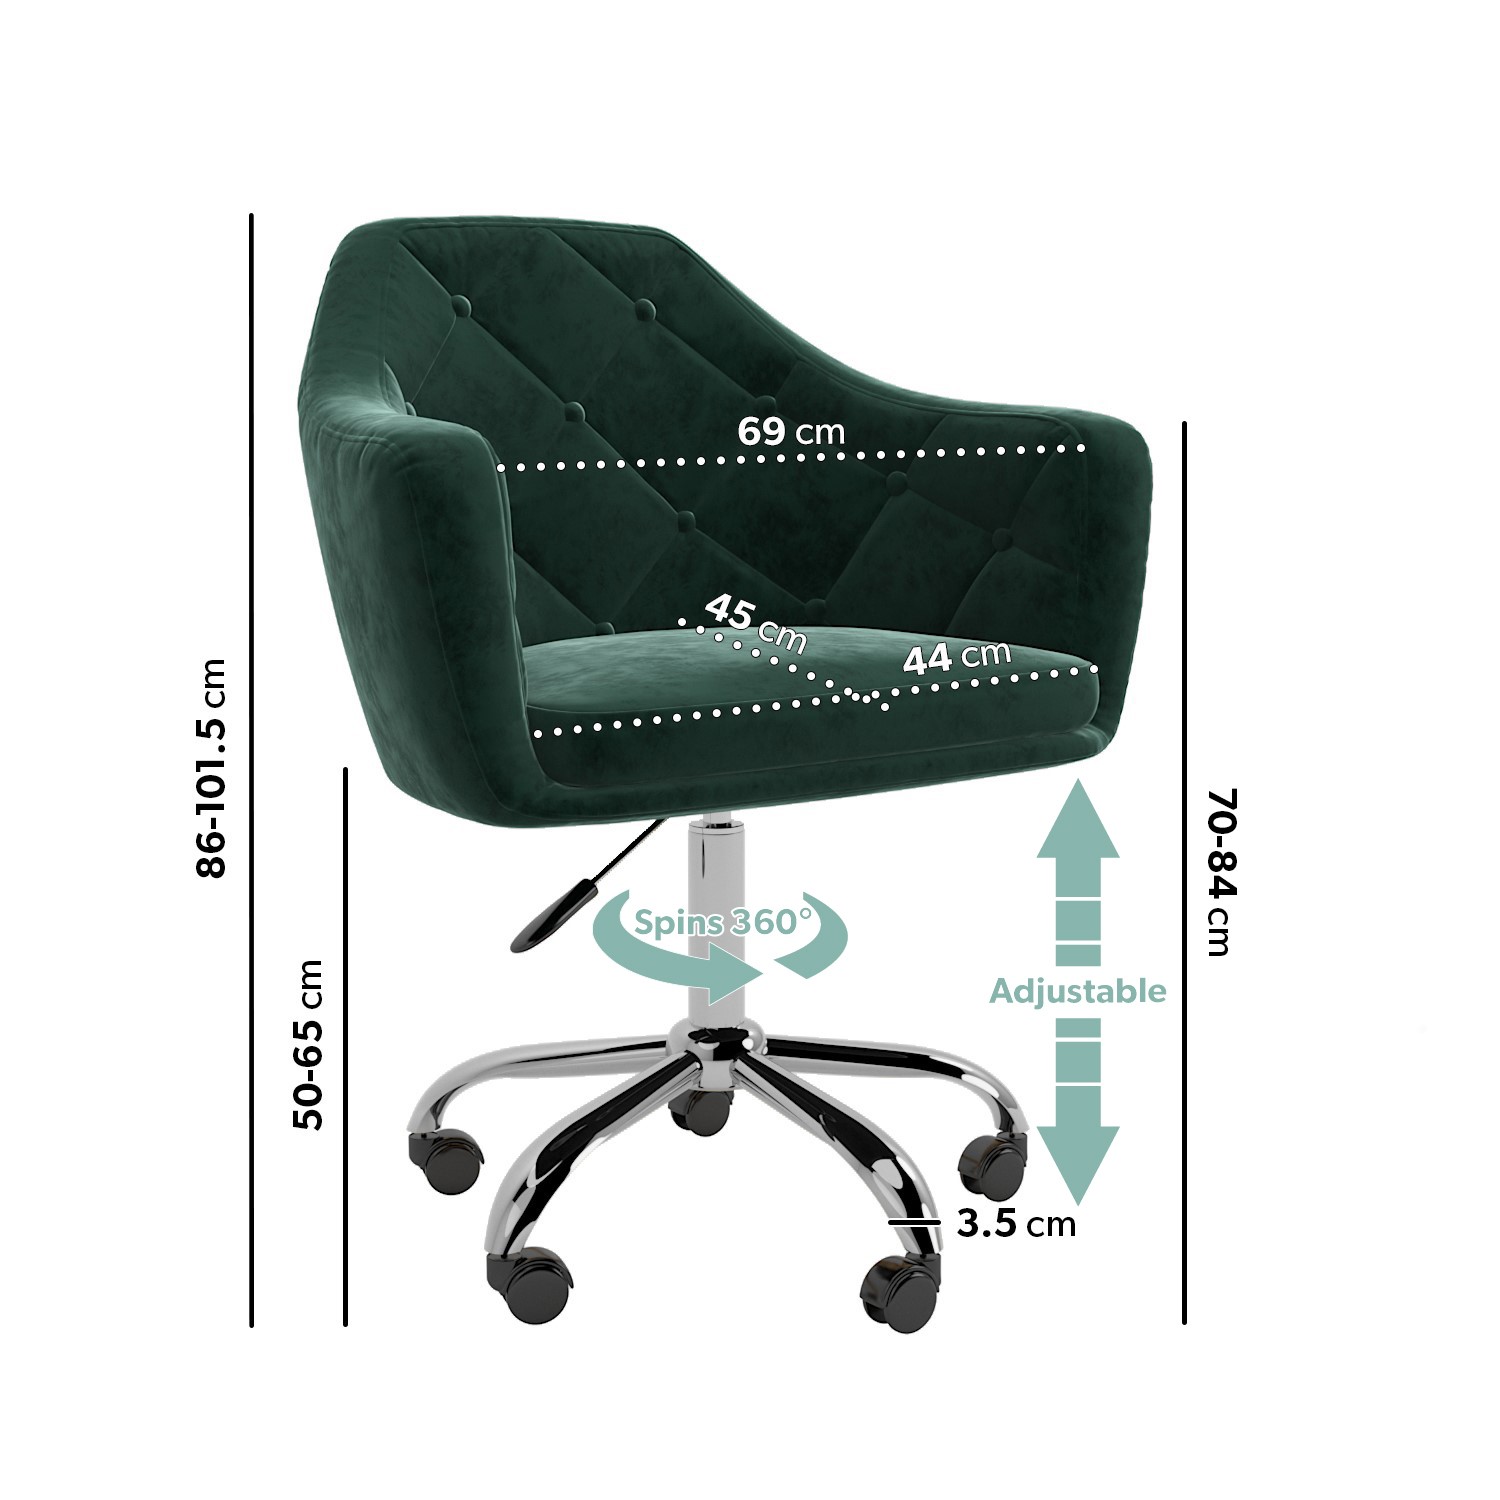 Read more about Dark green velvet office chair with arms marley